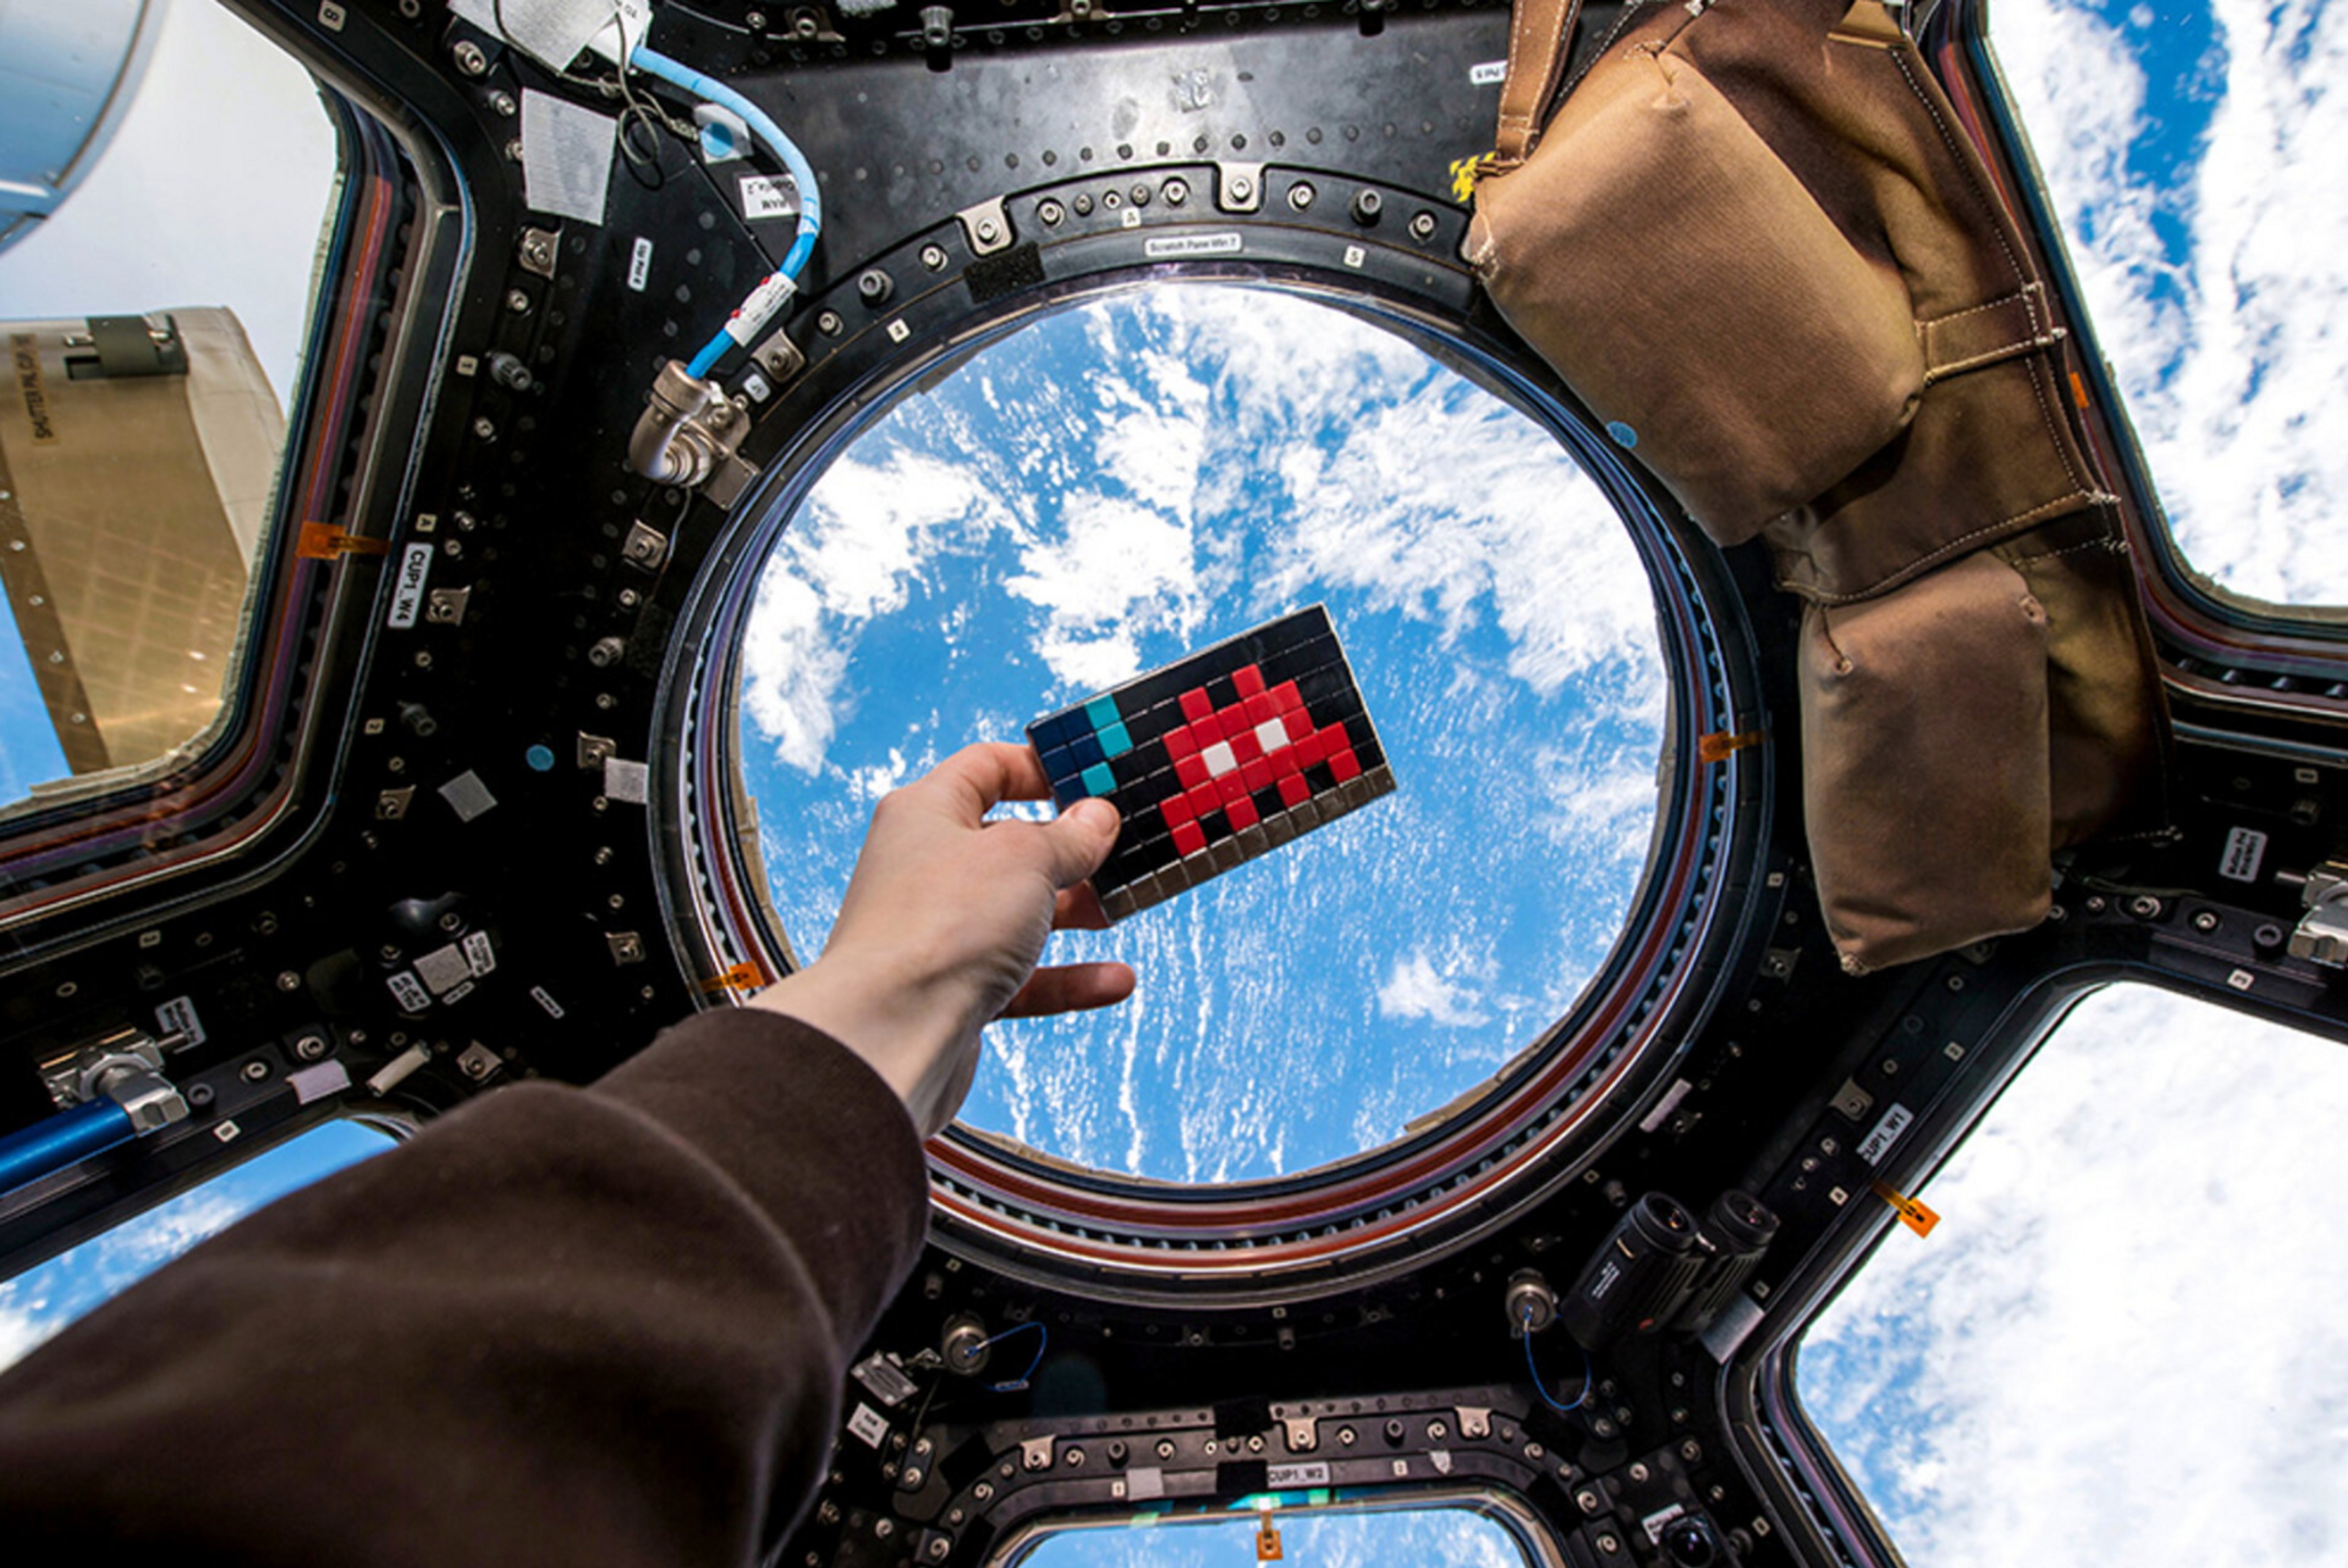 Invader in Space: From Street Art to Space Art